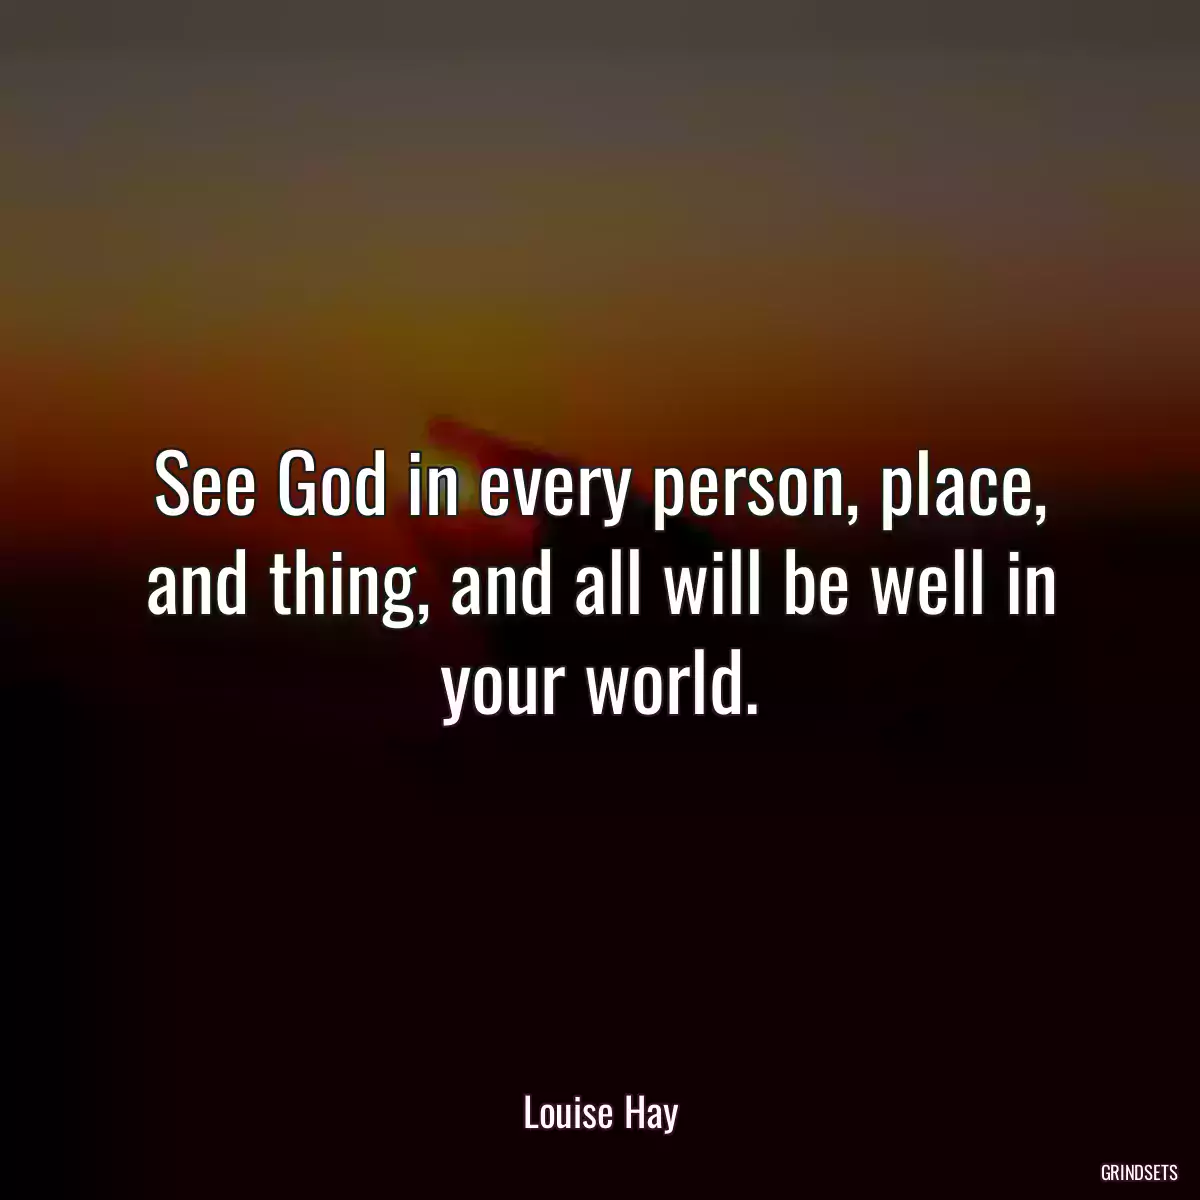 See God in every person, place, and thing, and all will be well in your world.